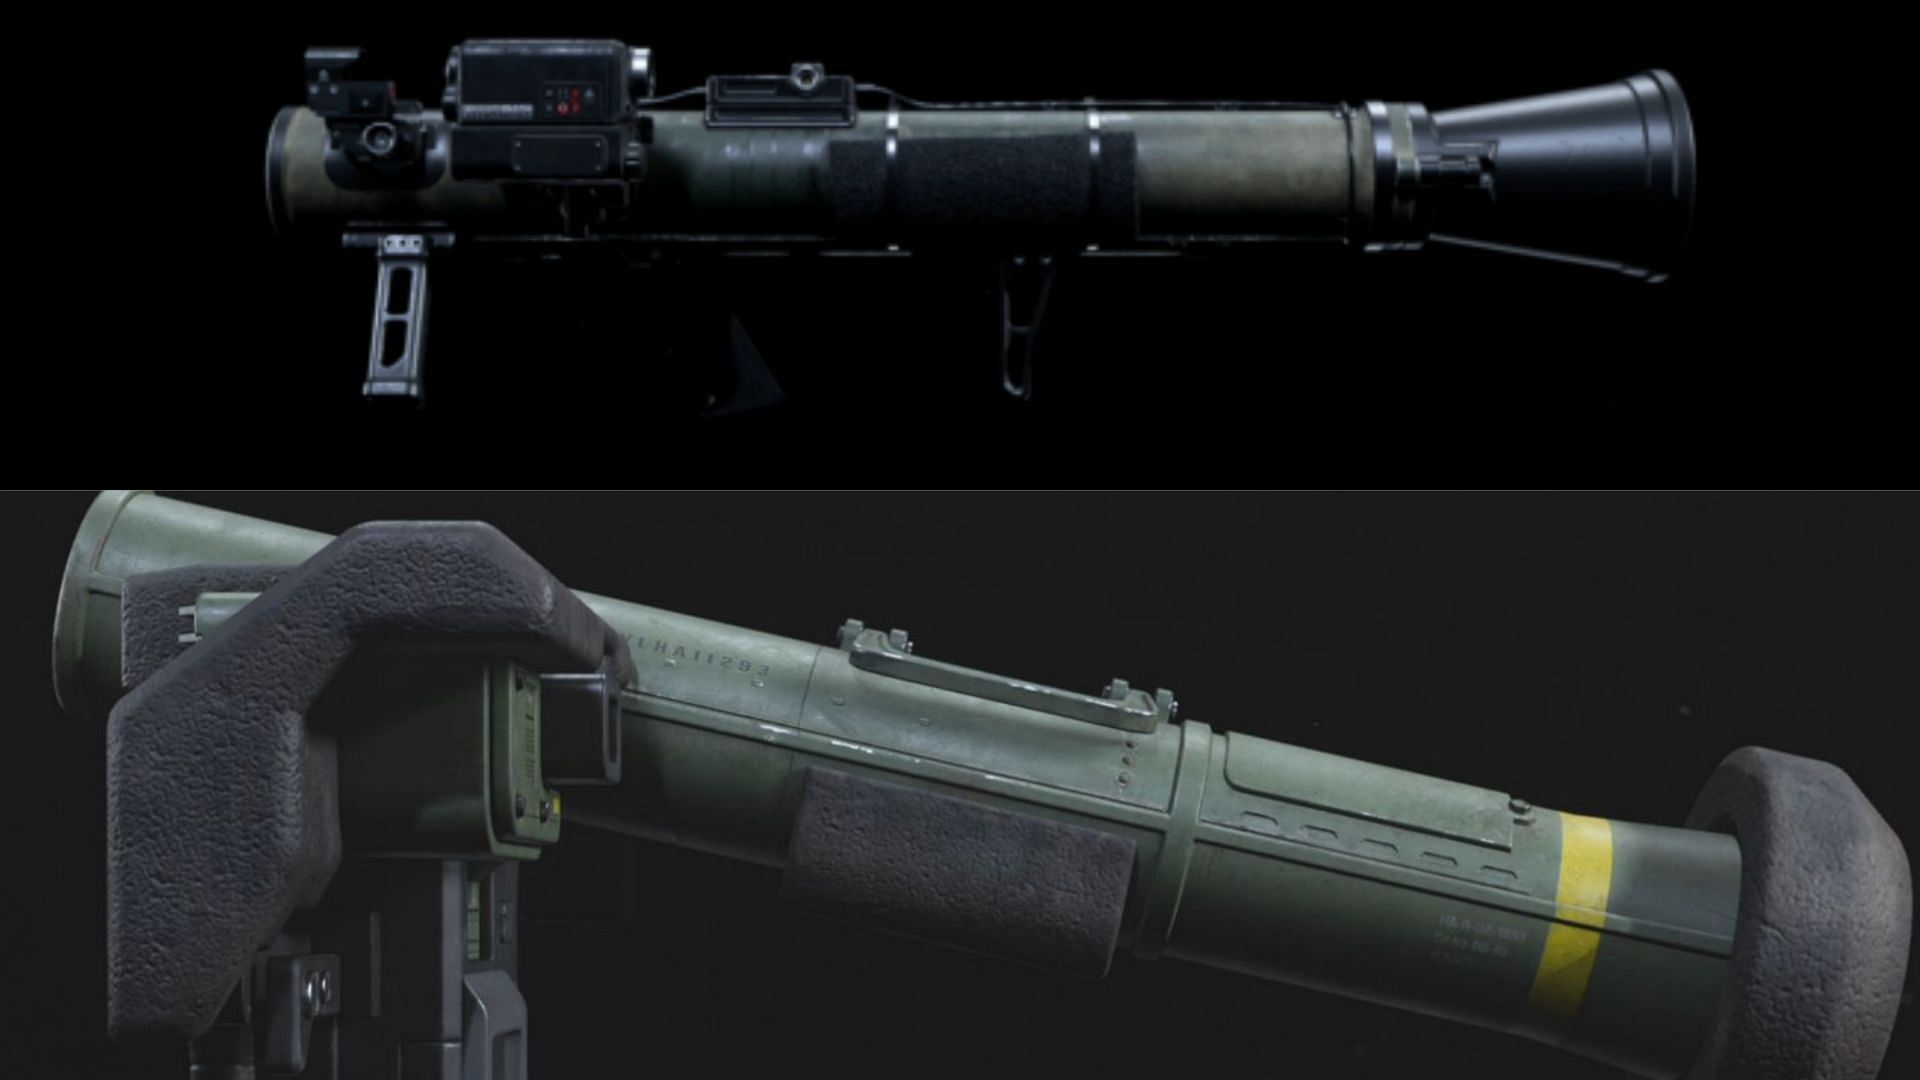 The Strela-P and JOKR launchers (Image via Activision)